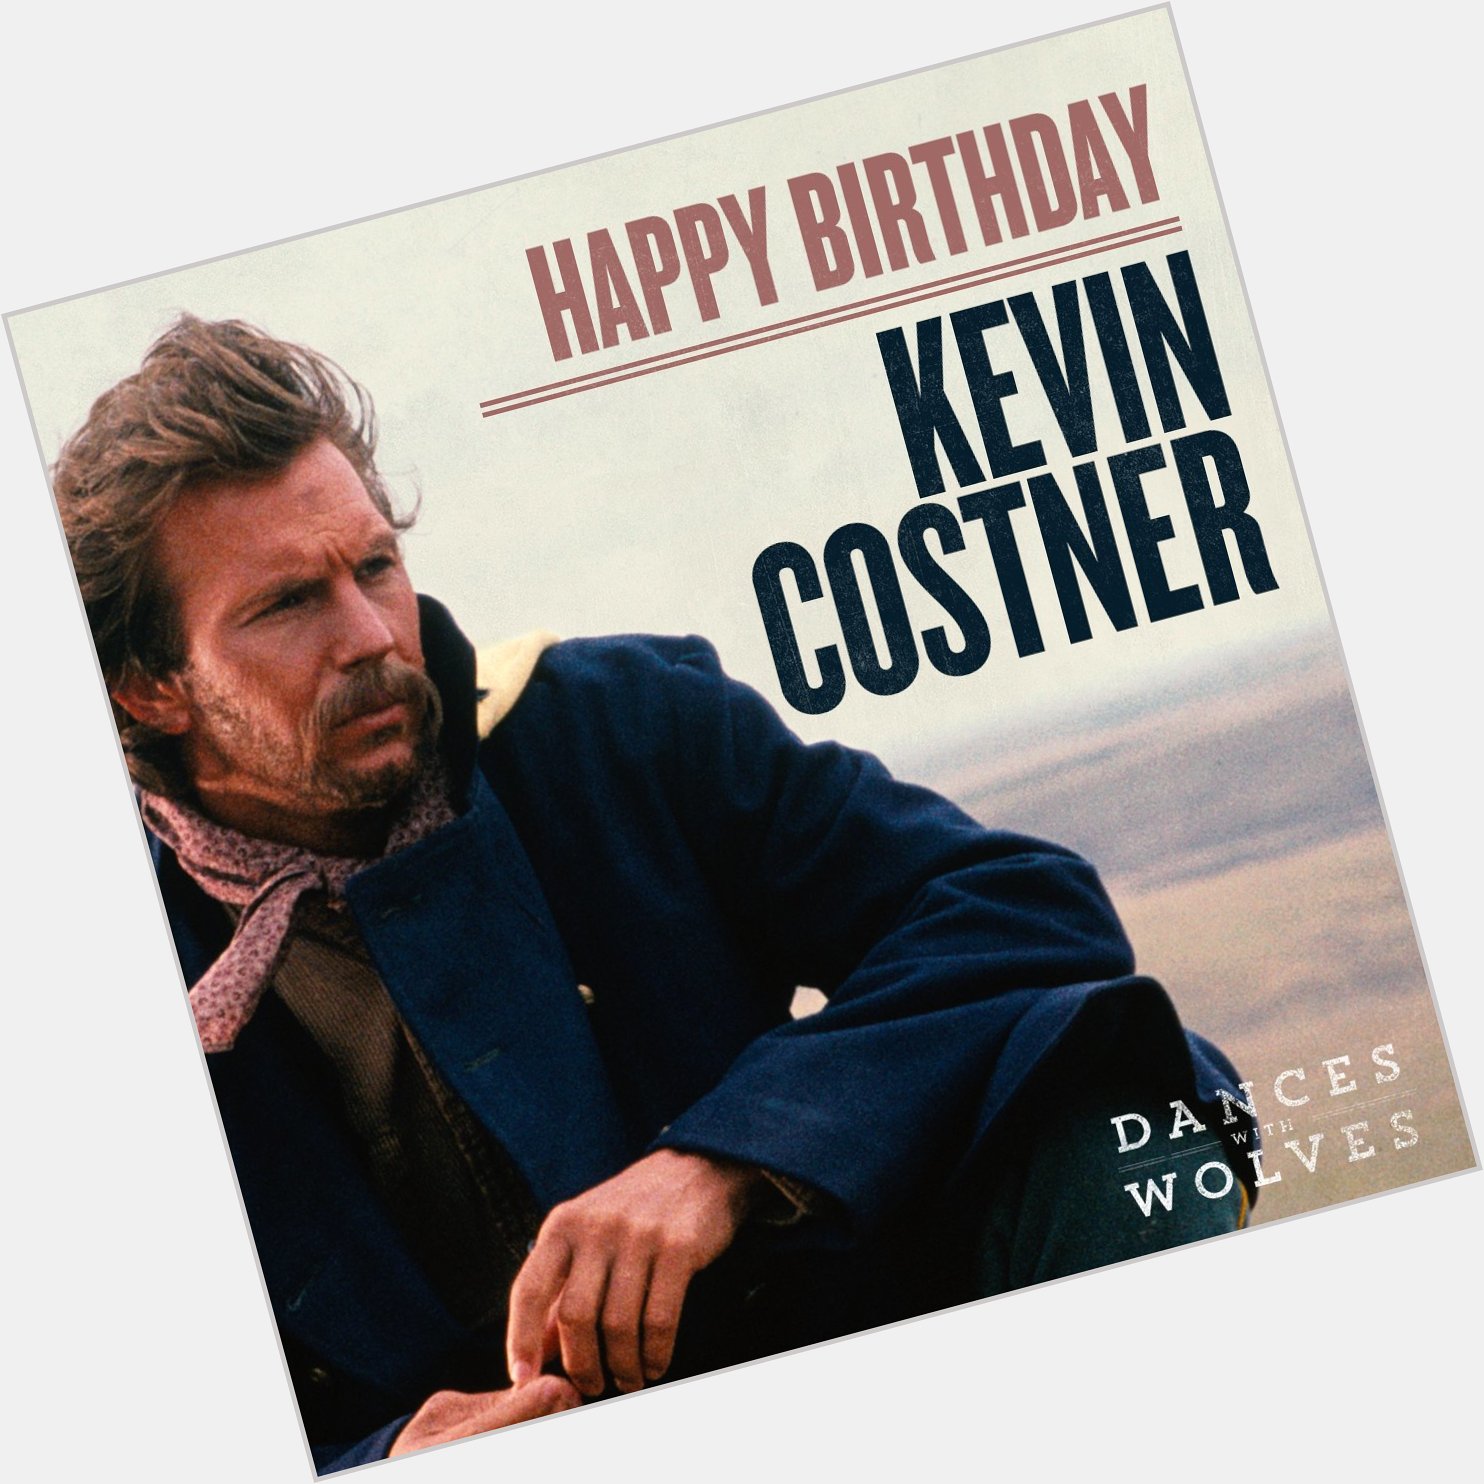 Join us in wishing Kevin Costner a very happy birthday! 